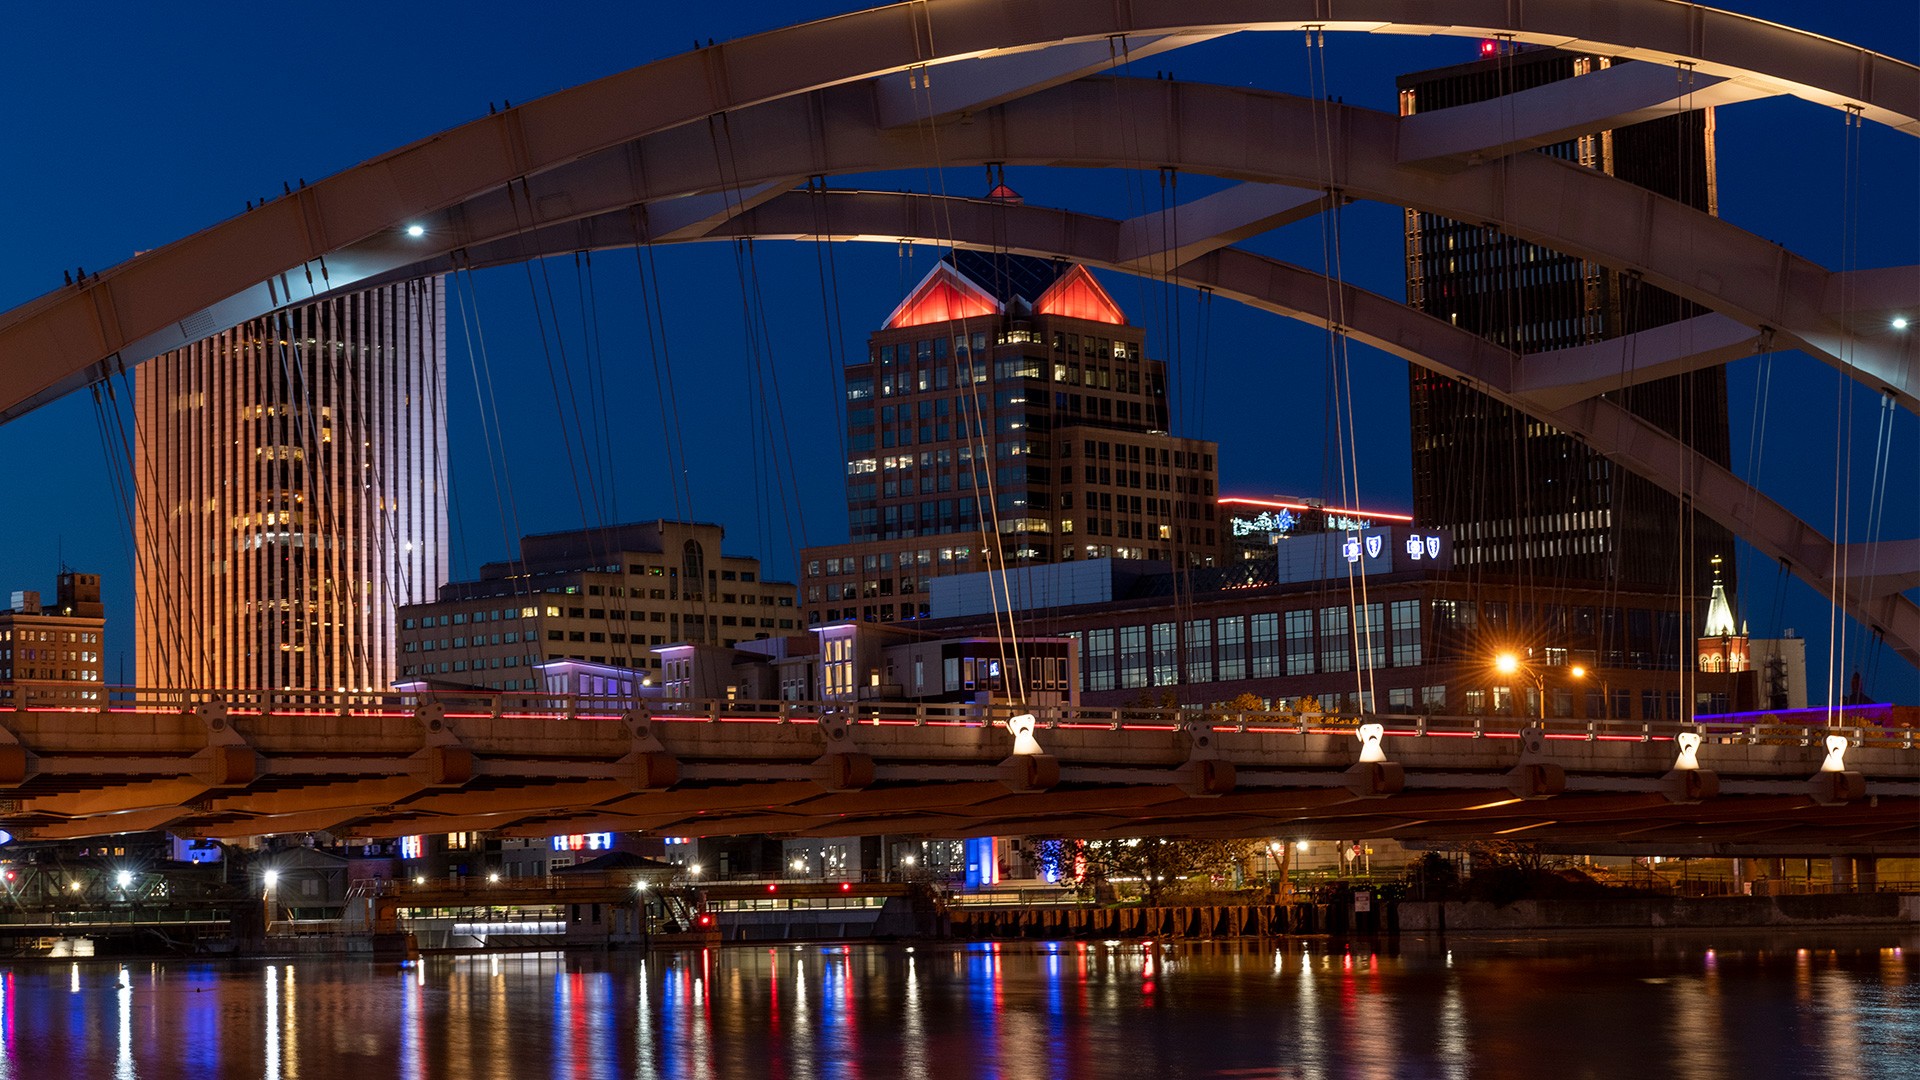 A photo of the Rochester city skyline lit up at night